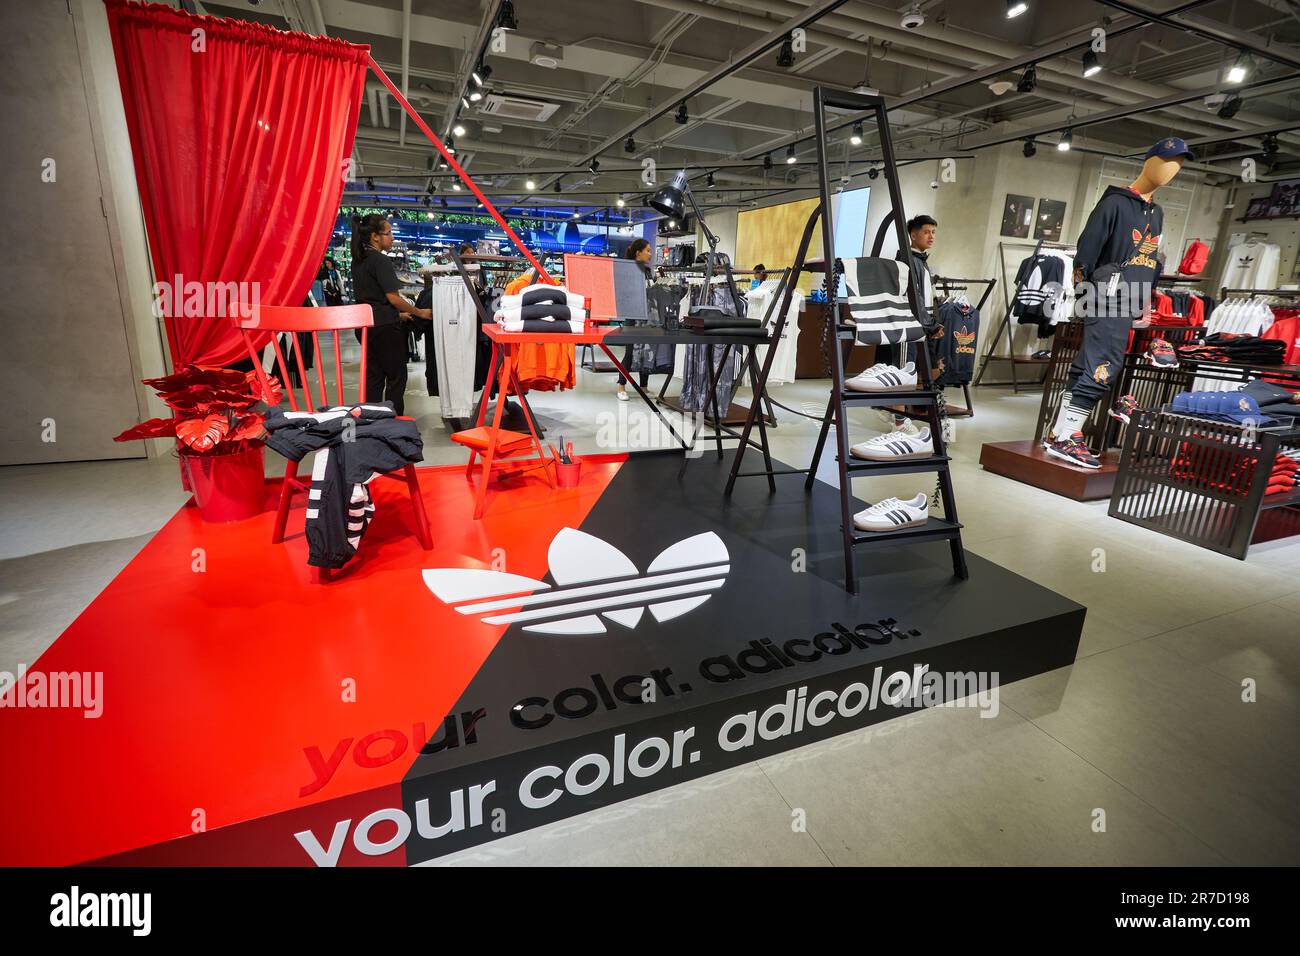 Adidas interior hi-res and images Page 7 - Alamy